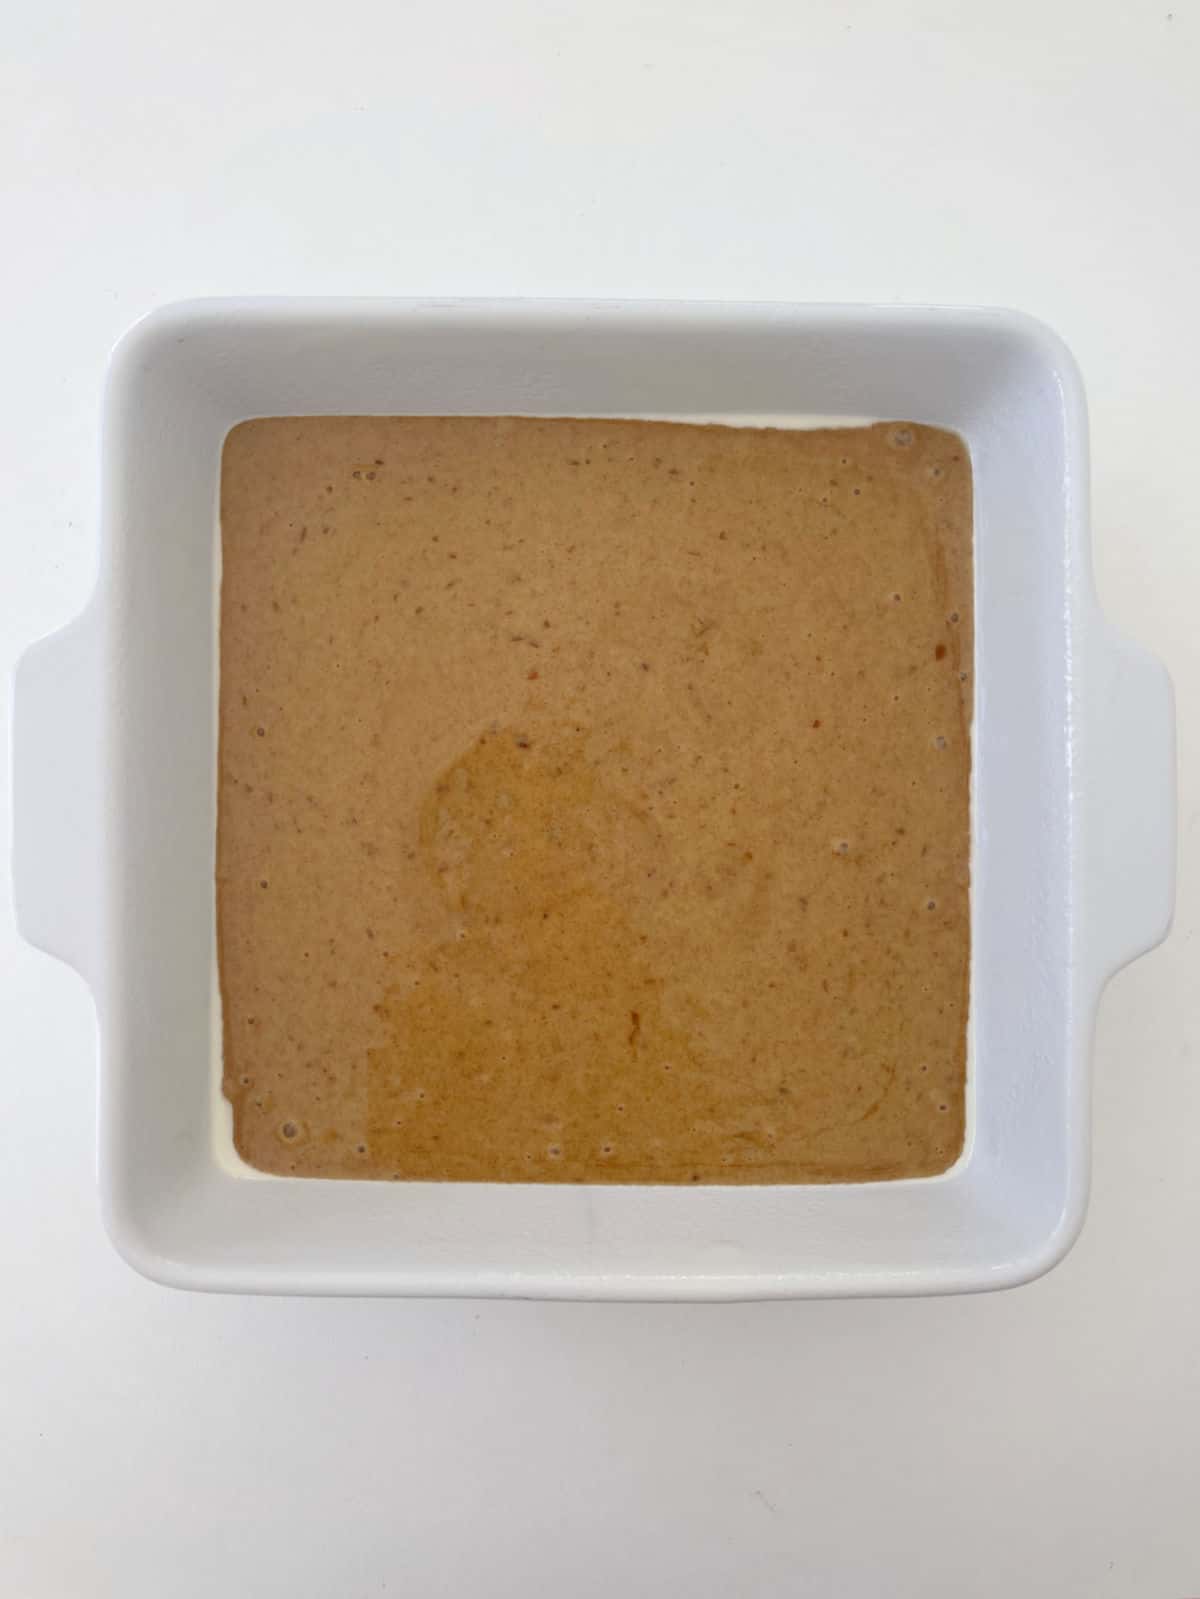 Sticky Date Pudding mixture in a white square baking dish.